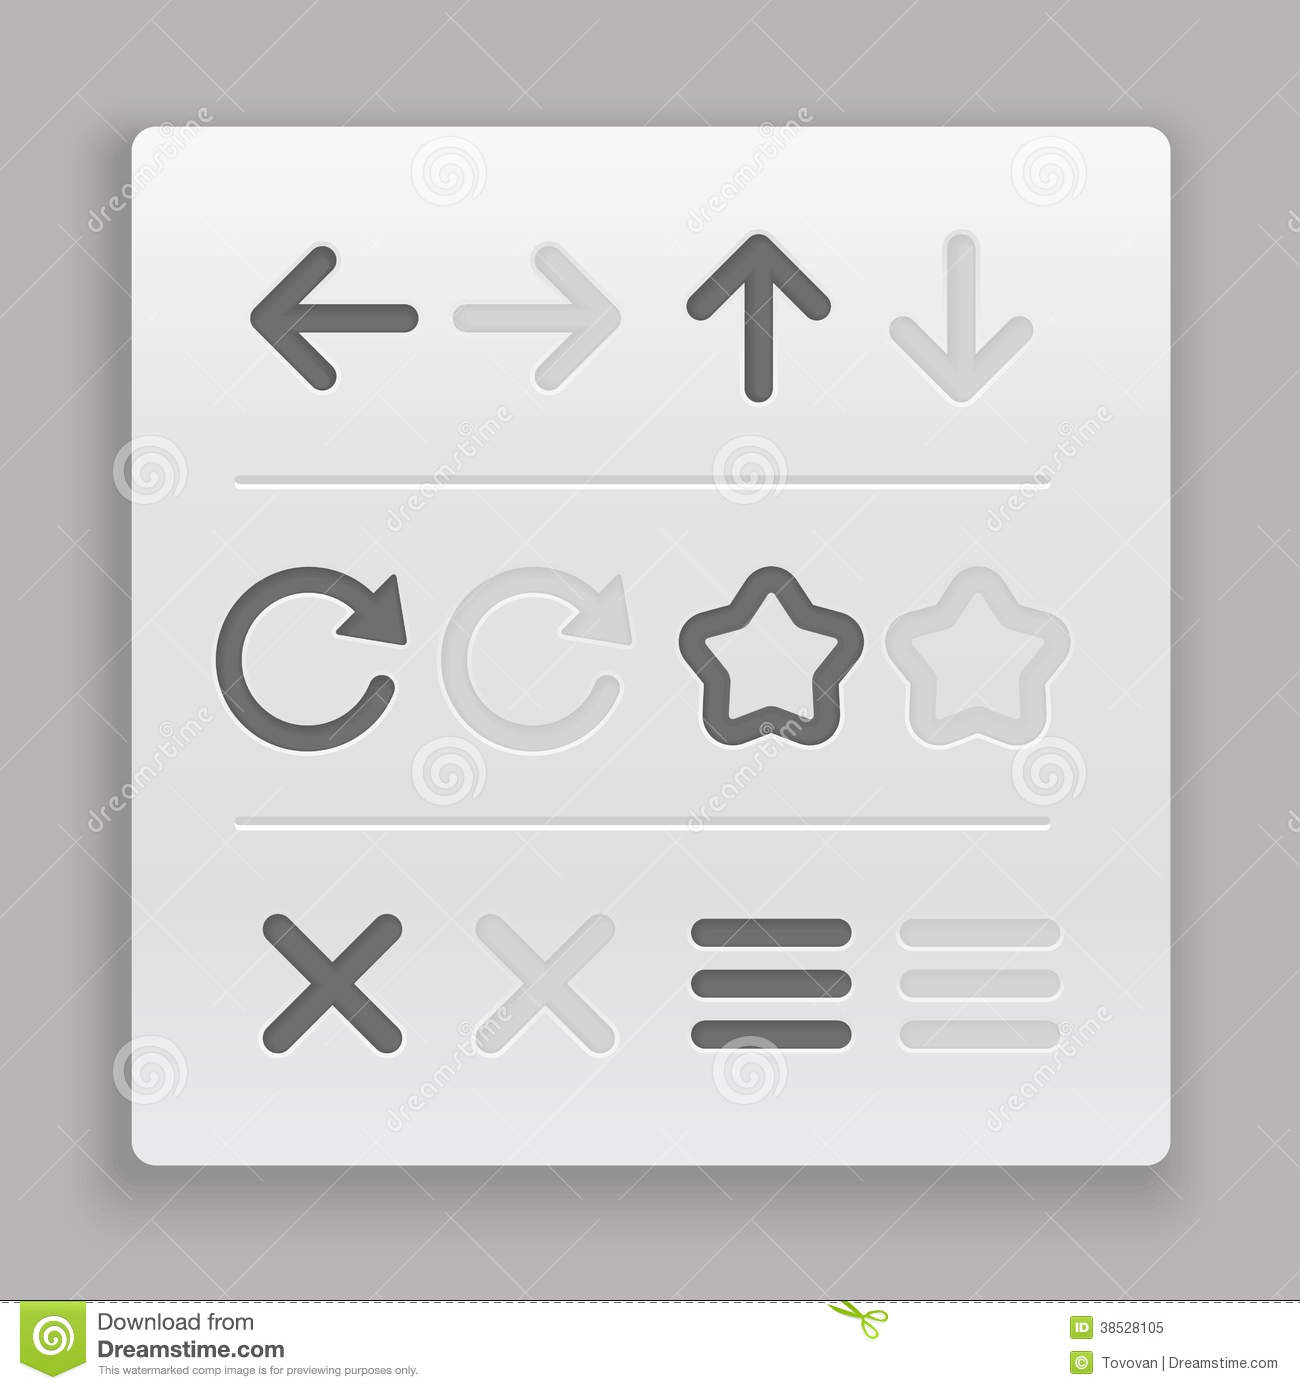 Web Navigation Buttons Clip Art Royalty Free Stock Photo   Image